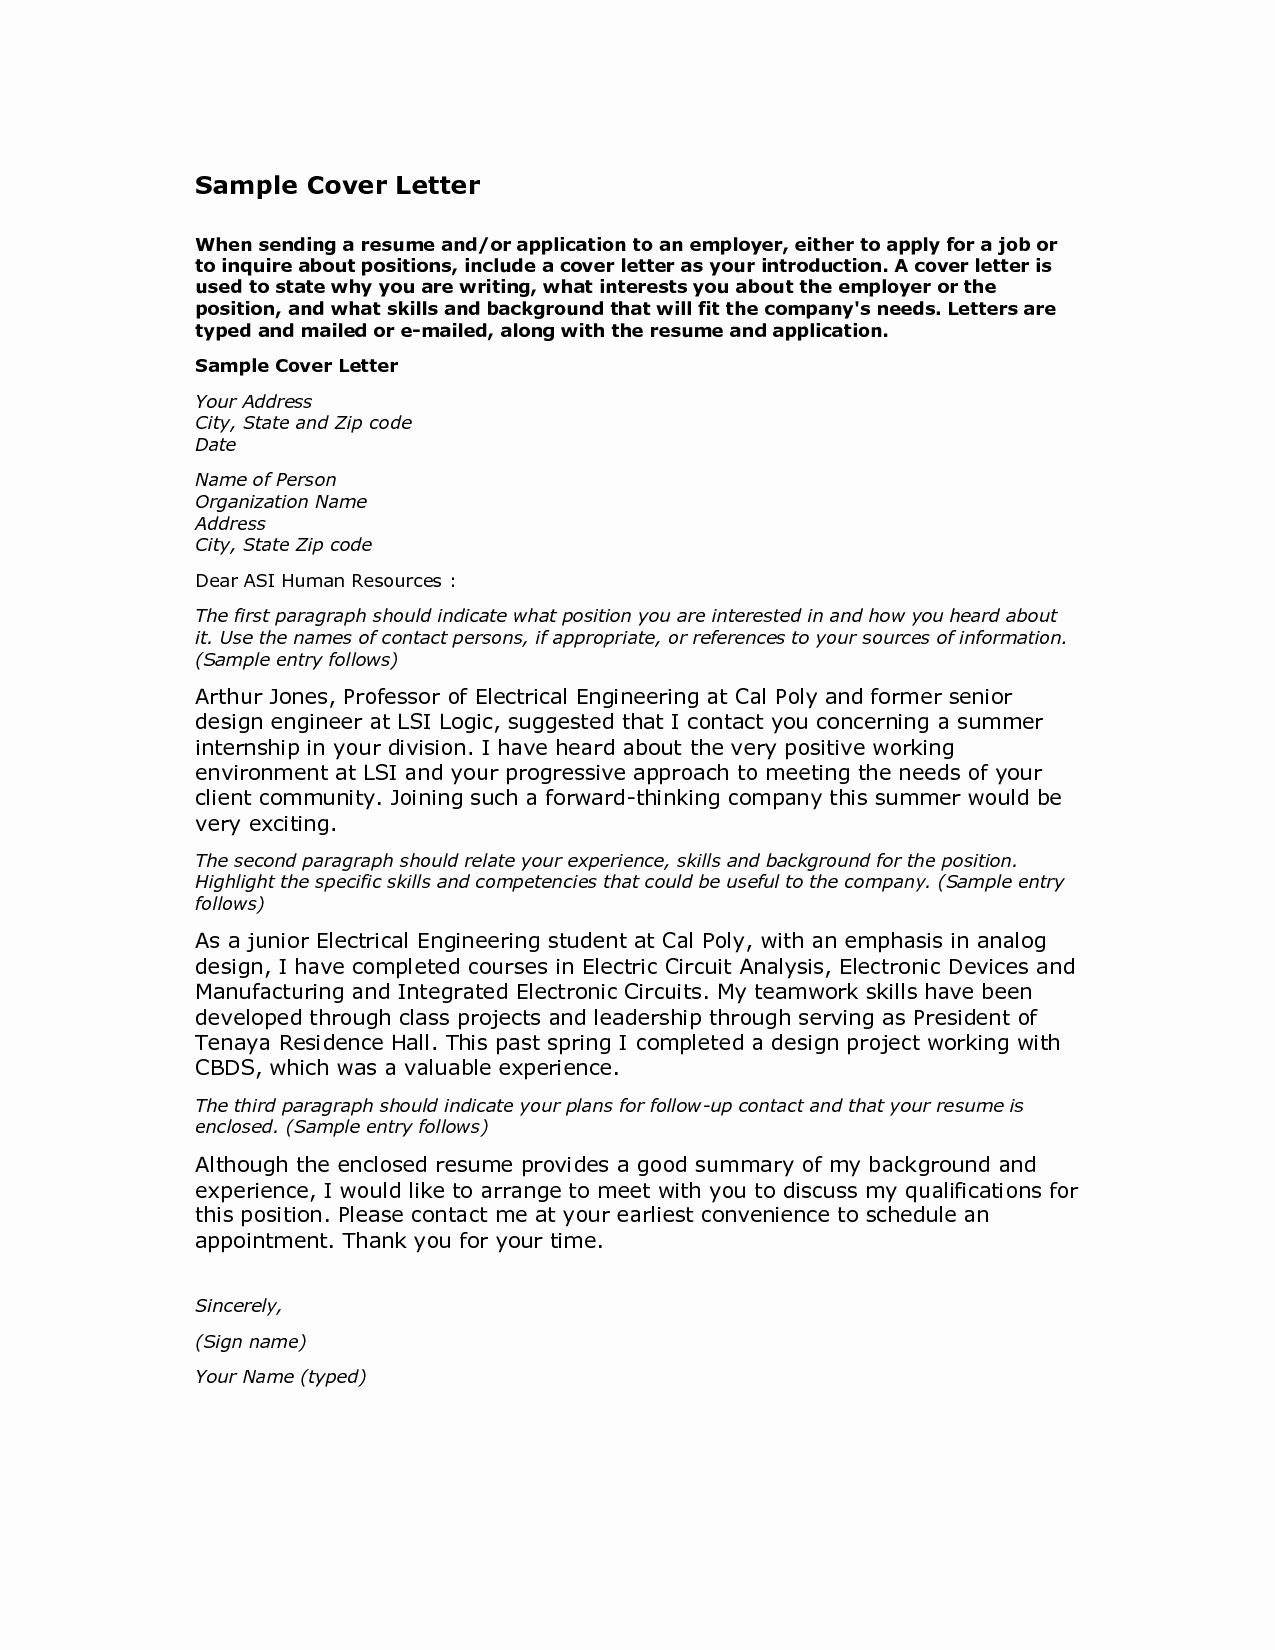 Letter Of Application Example New Cover Letter Sample Cover Letter for Job Application